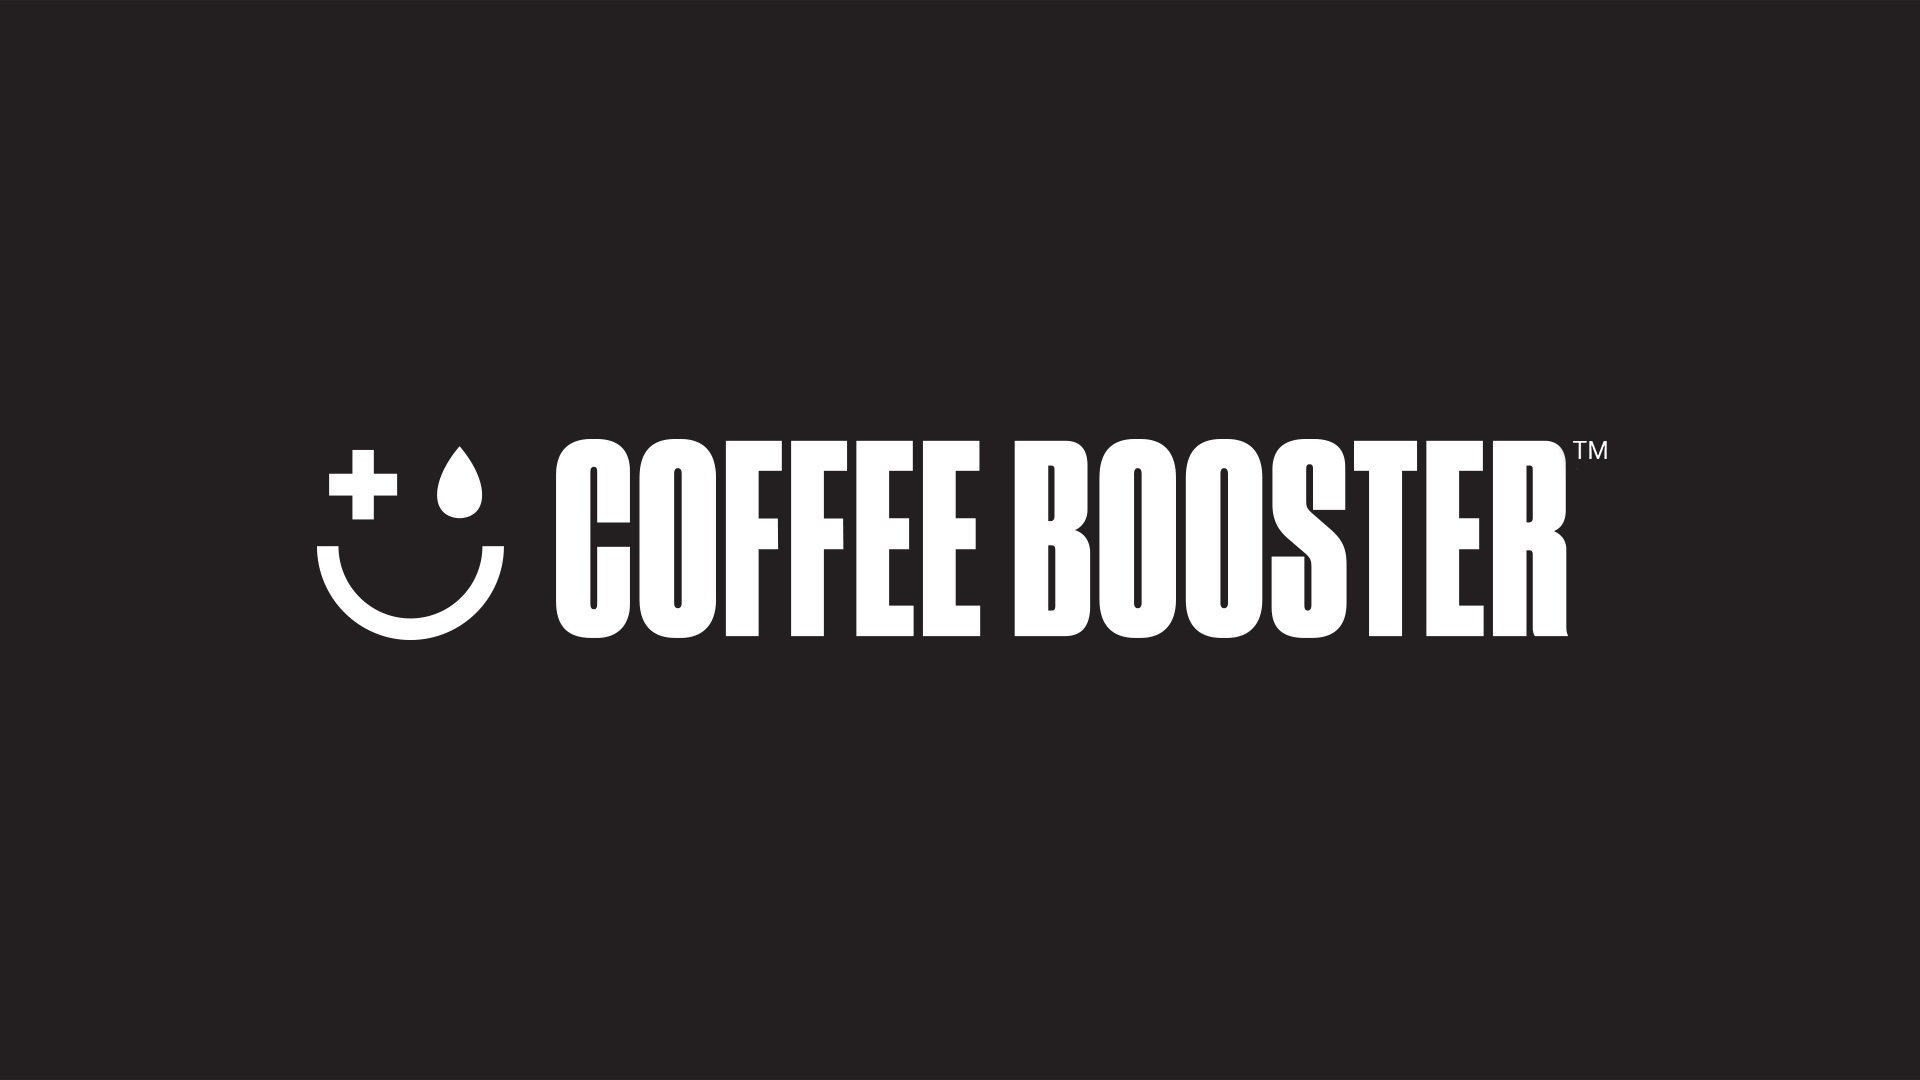 Coffee Booster Image